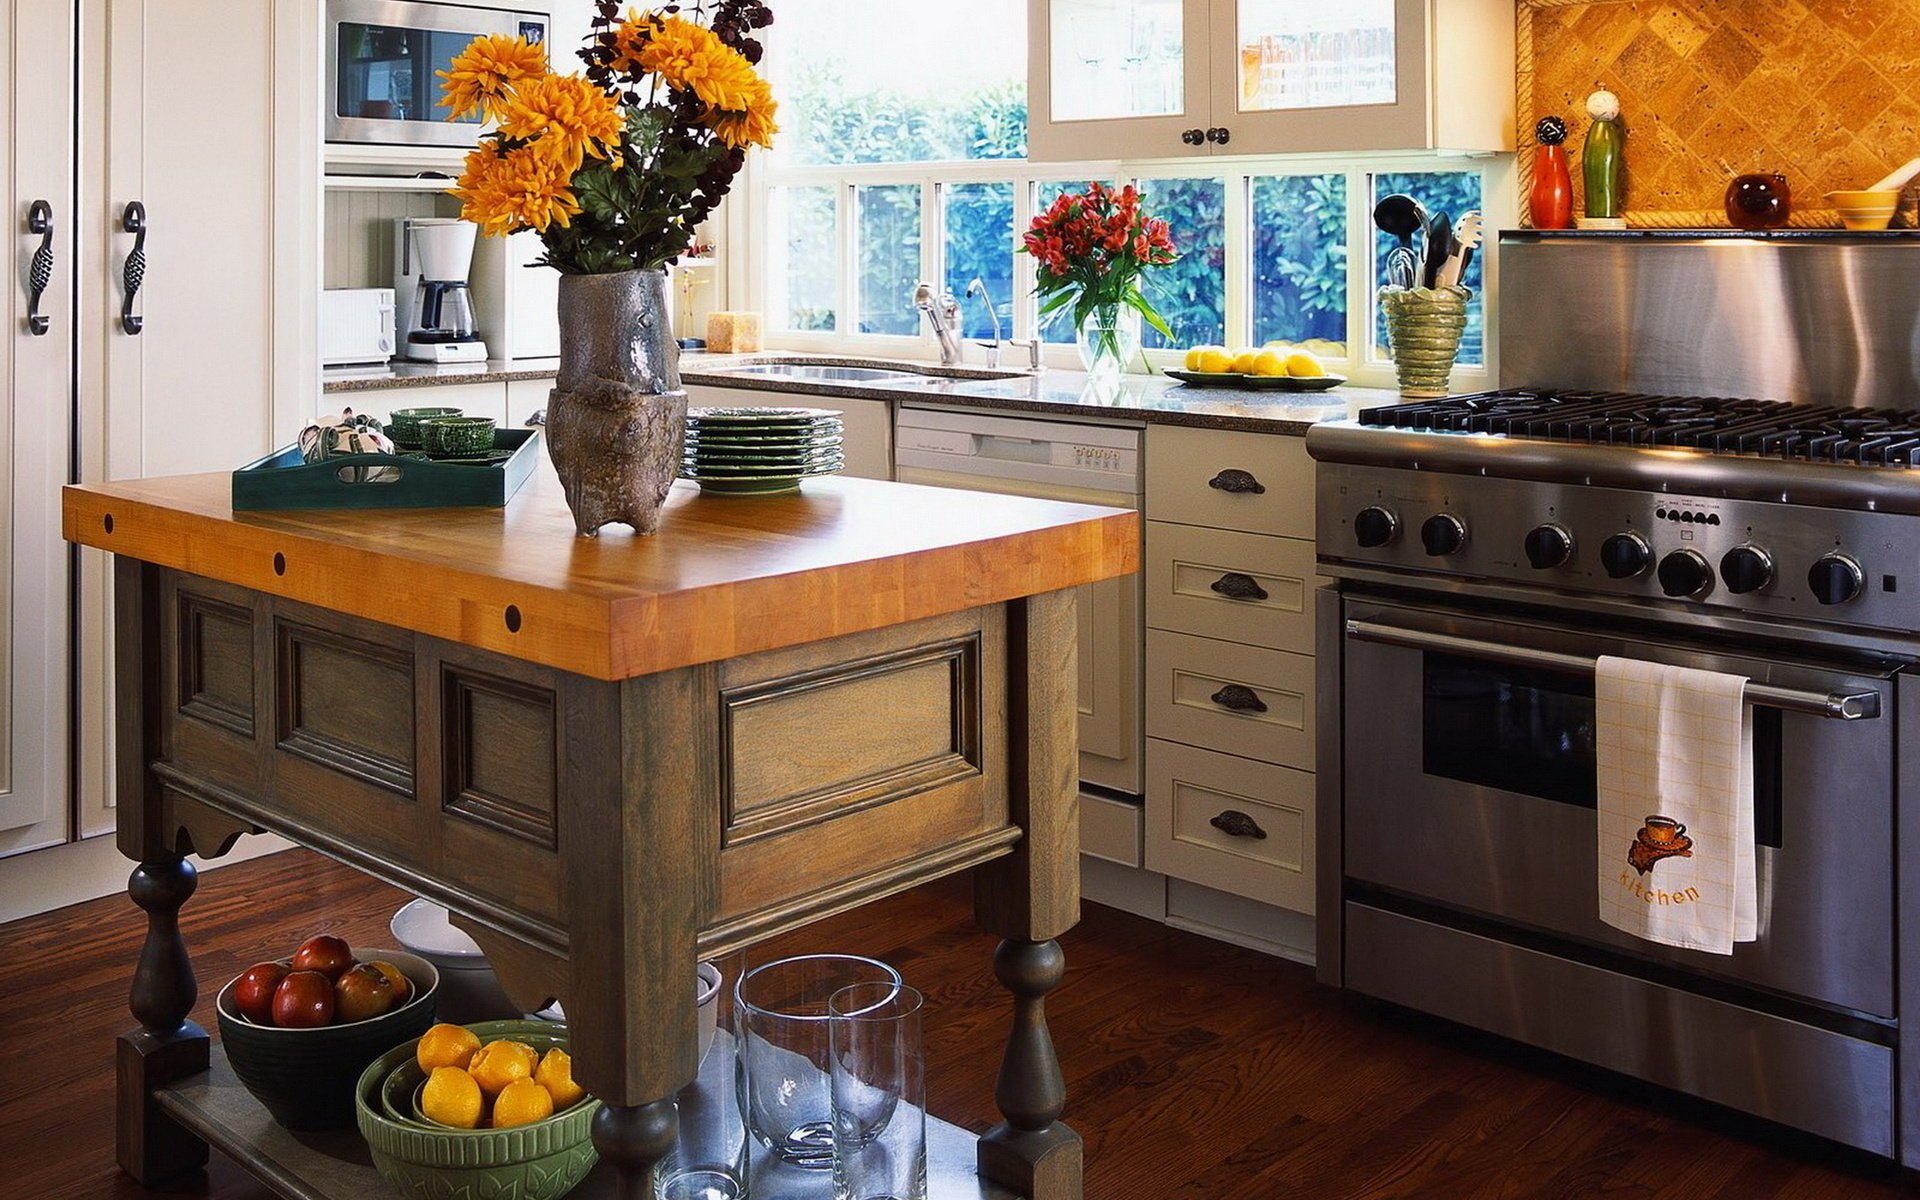 Cozy kitchen with bright flowers in vases